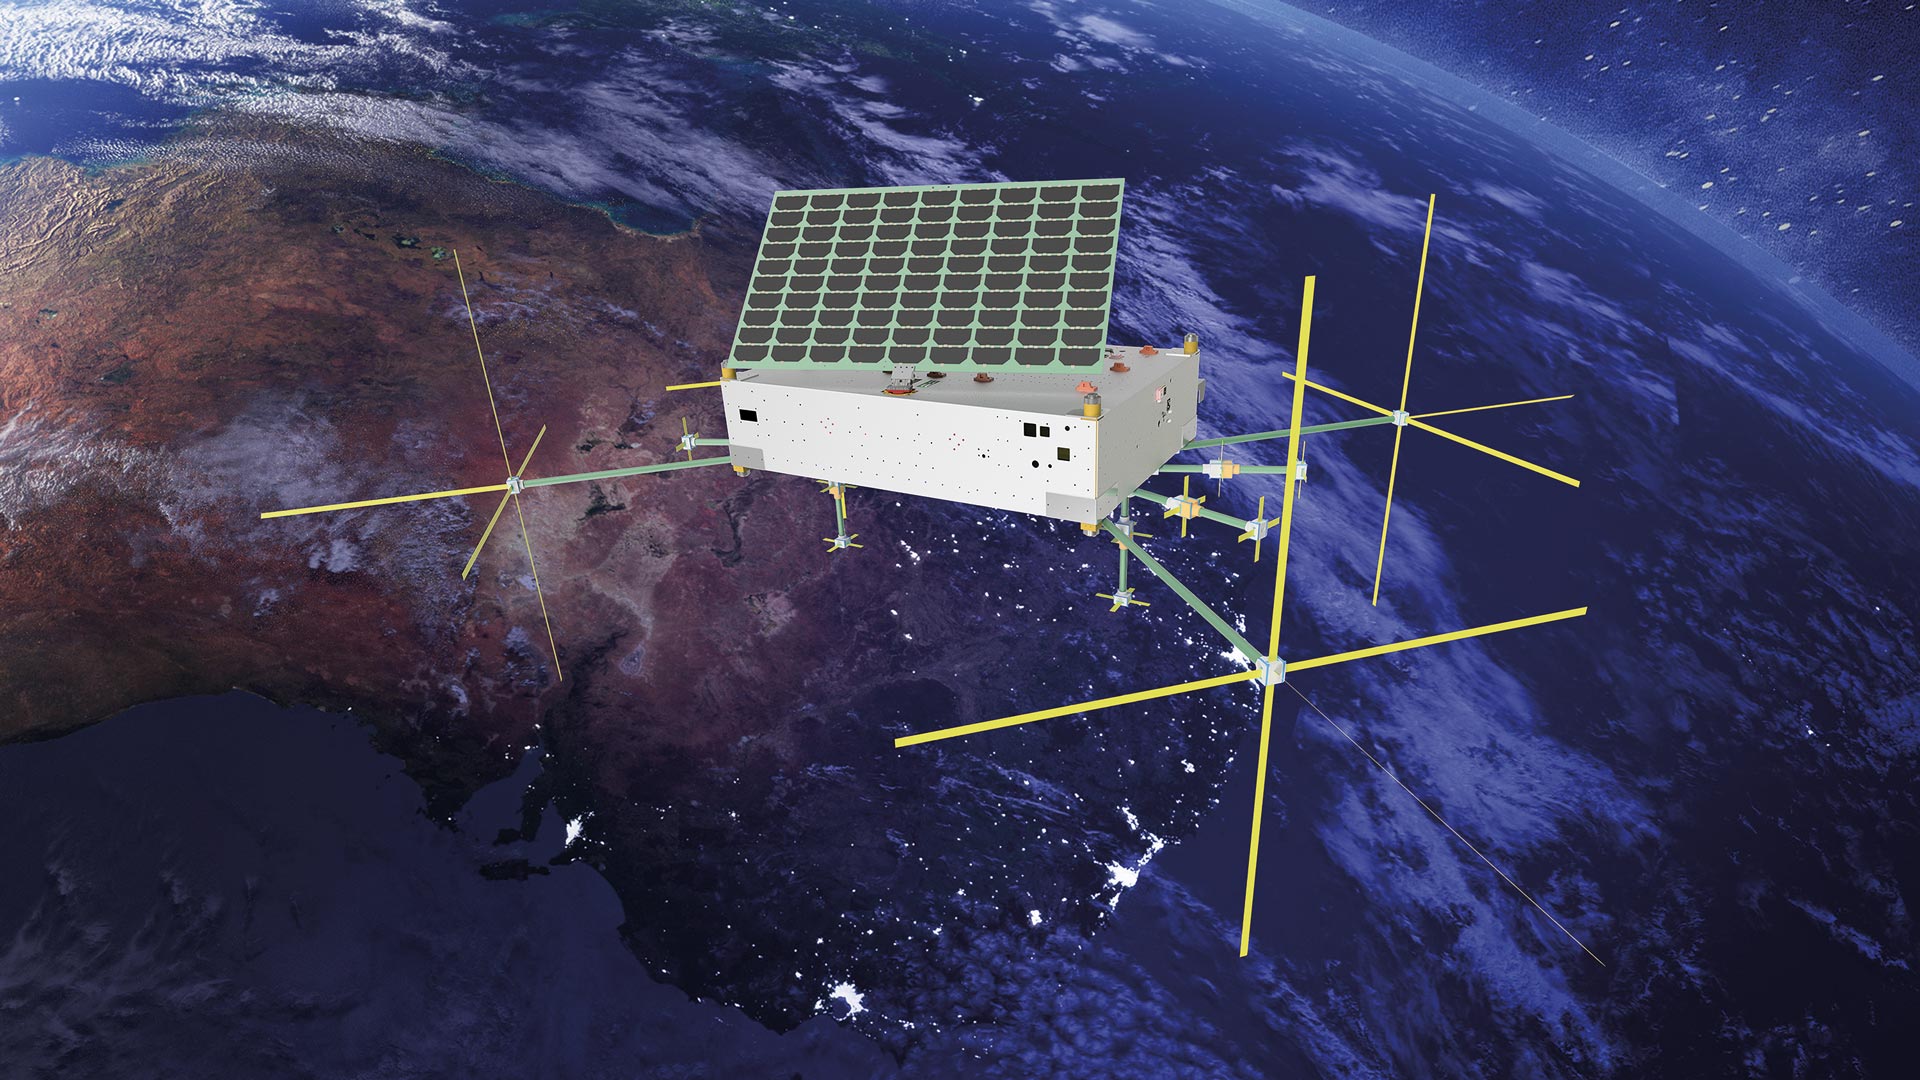 CAD image of Skykraft Satellite with Earth behind